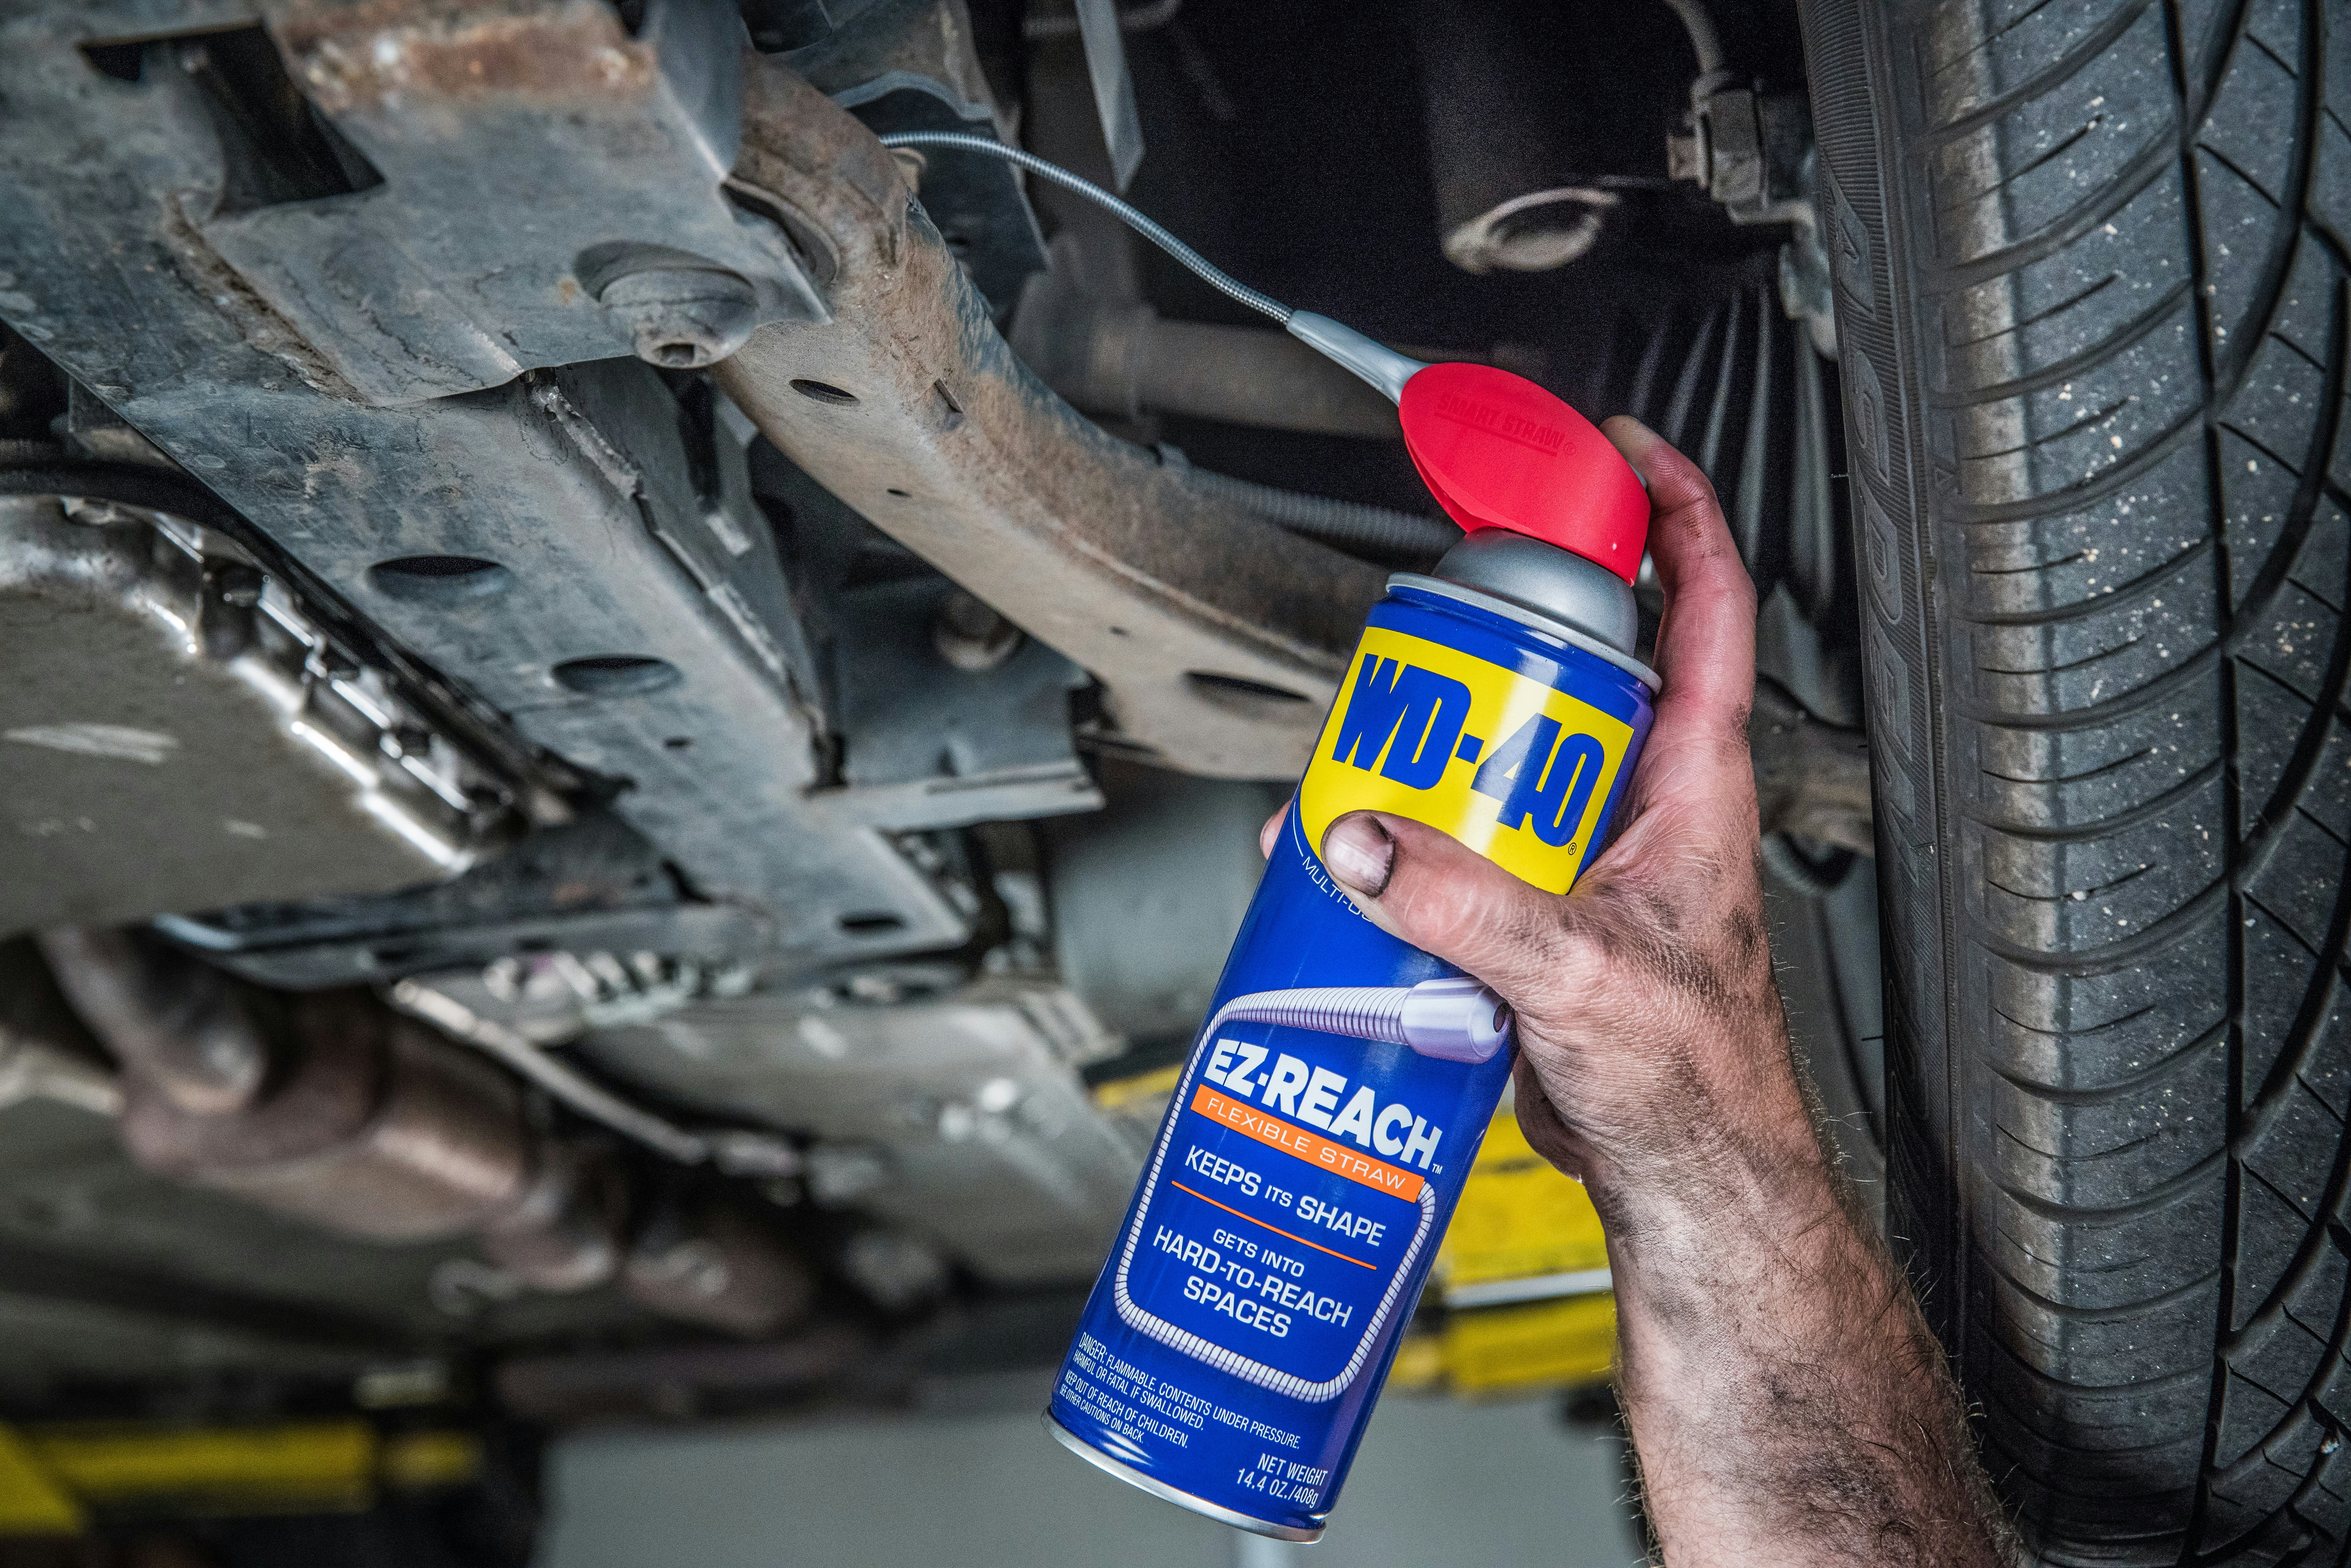 Can of WD-40 EZ-REACH